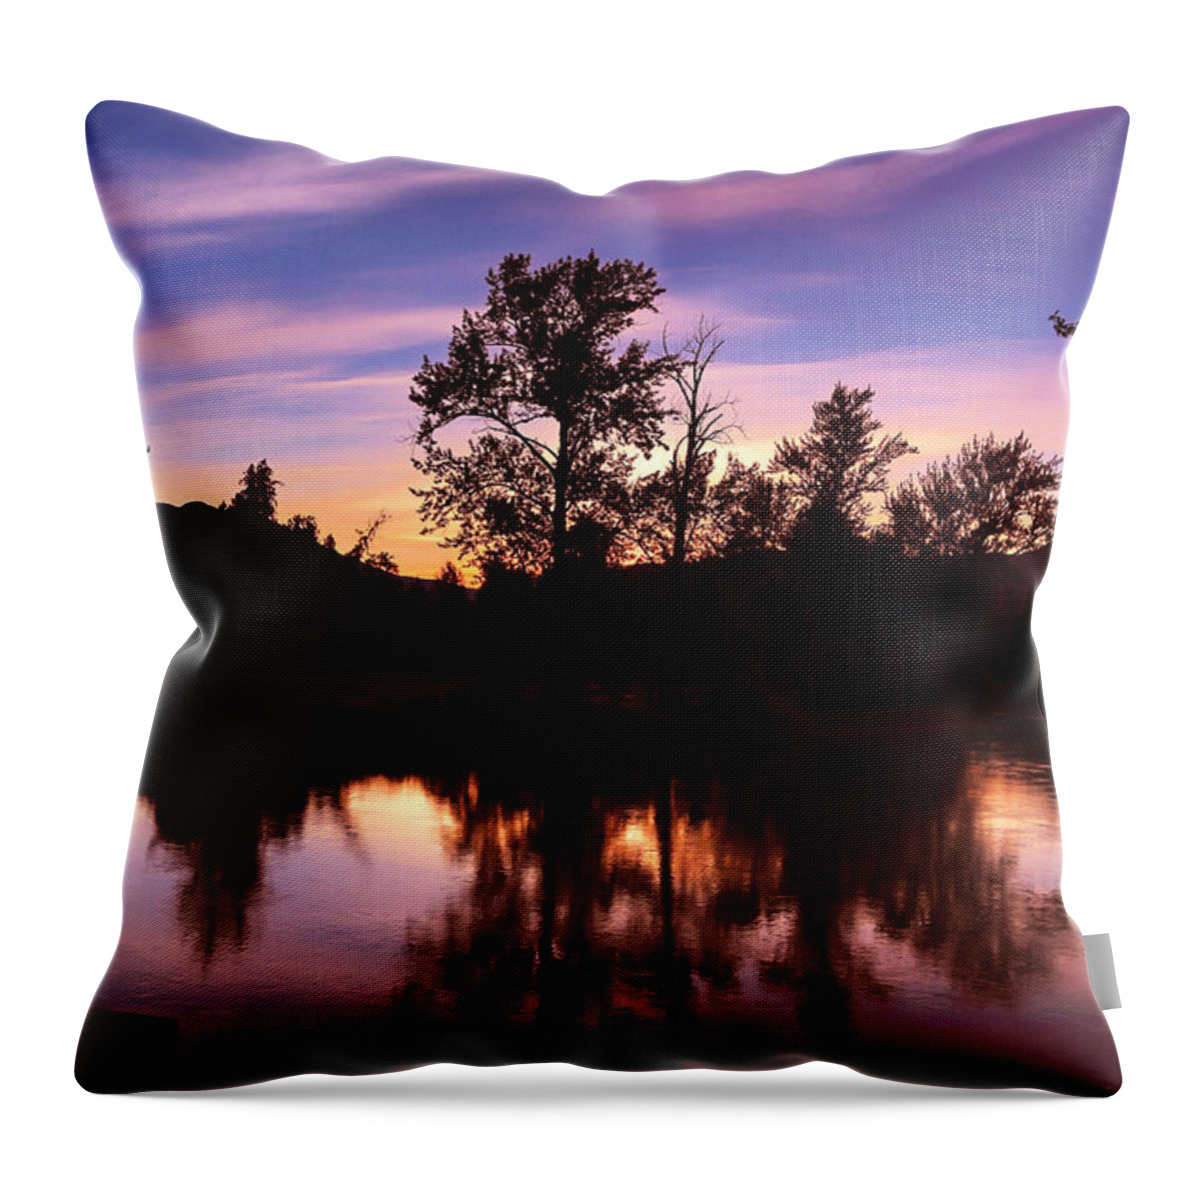 Morning Throw Pillow featuring the photograph Morning Glow by Monte Arnold